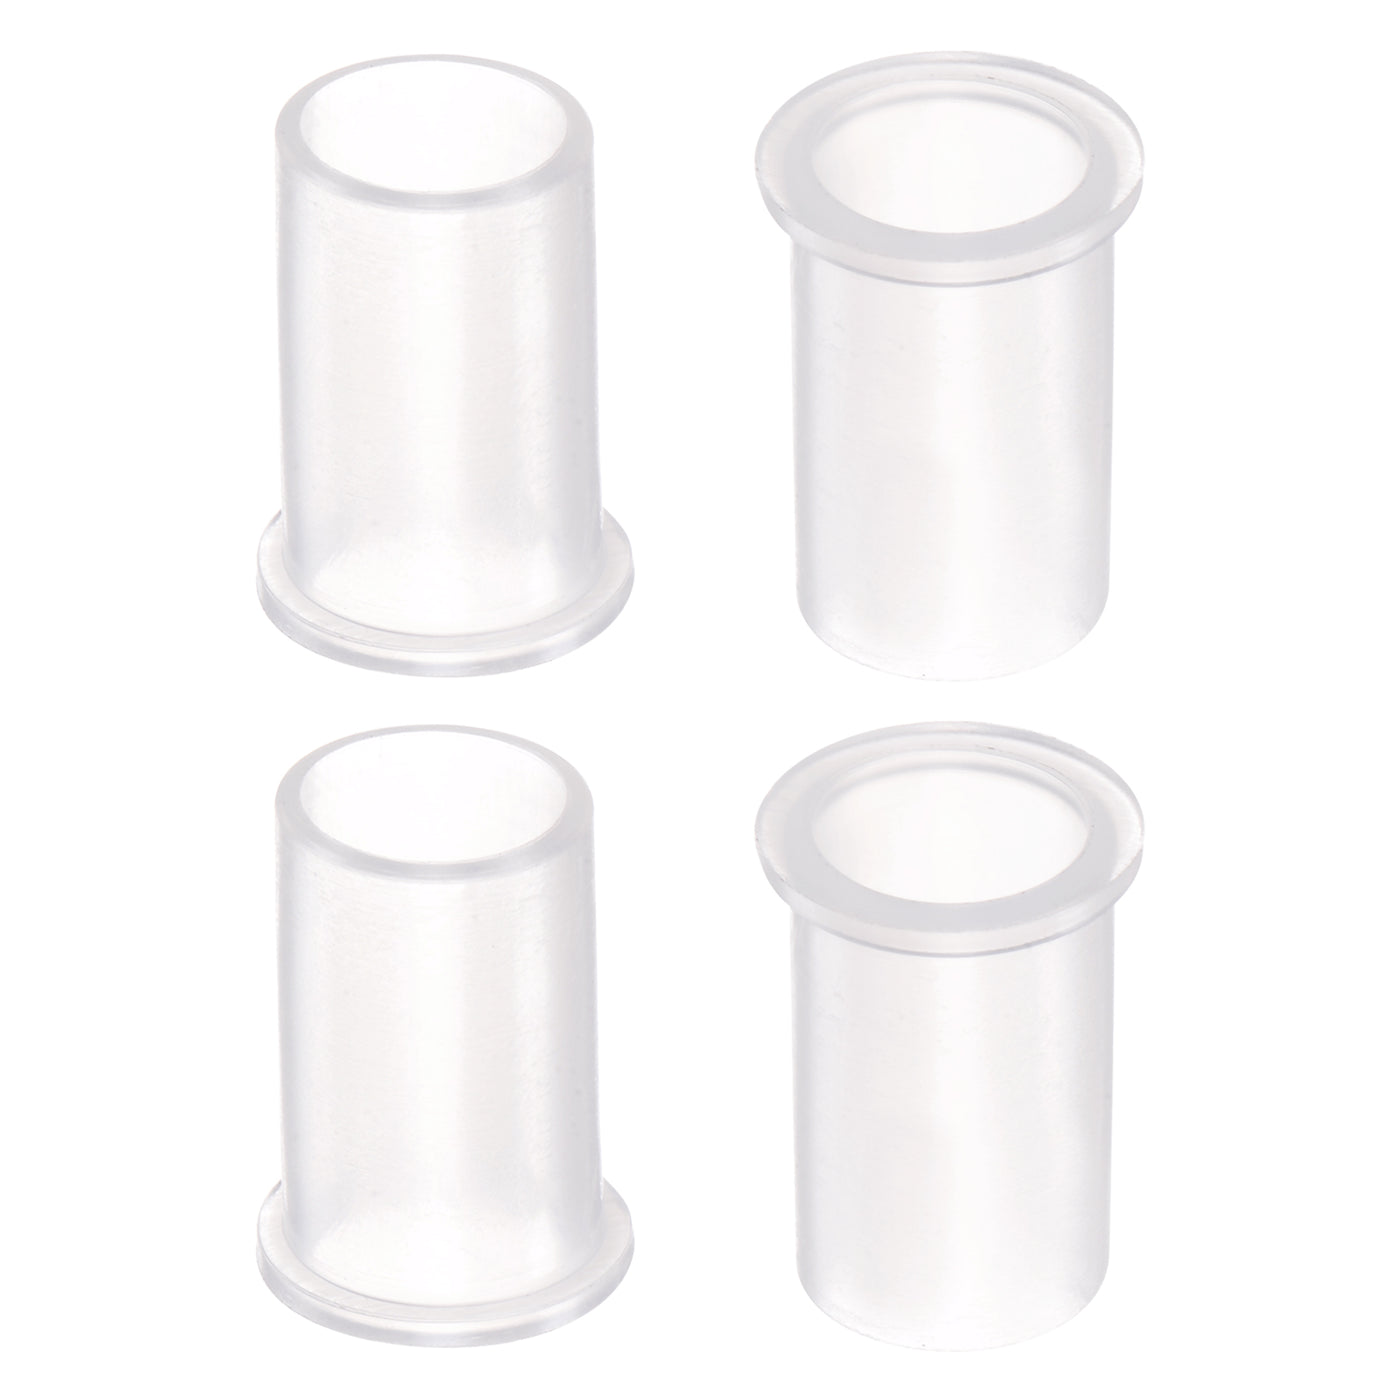 uxcell Uxcell 4pcs Flanged Nylon Bushings 9.95mm ID 11.95mm OD 19.2mm Length, Translucent